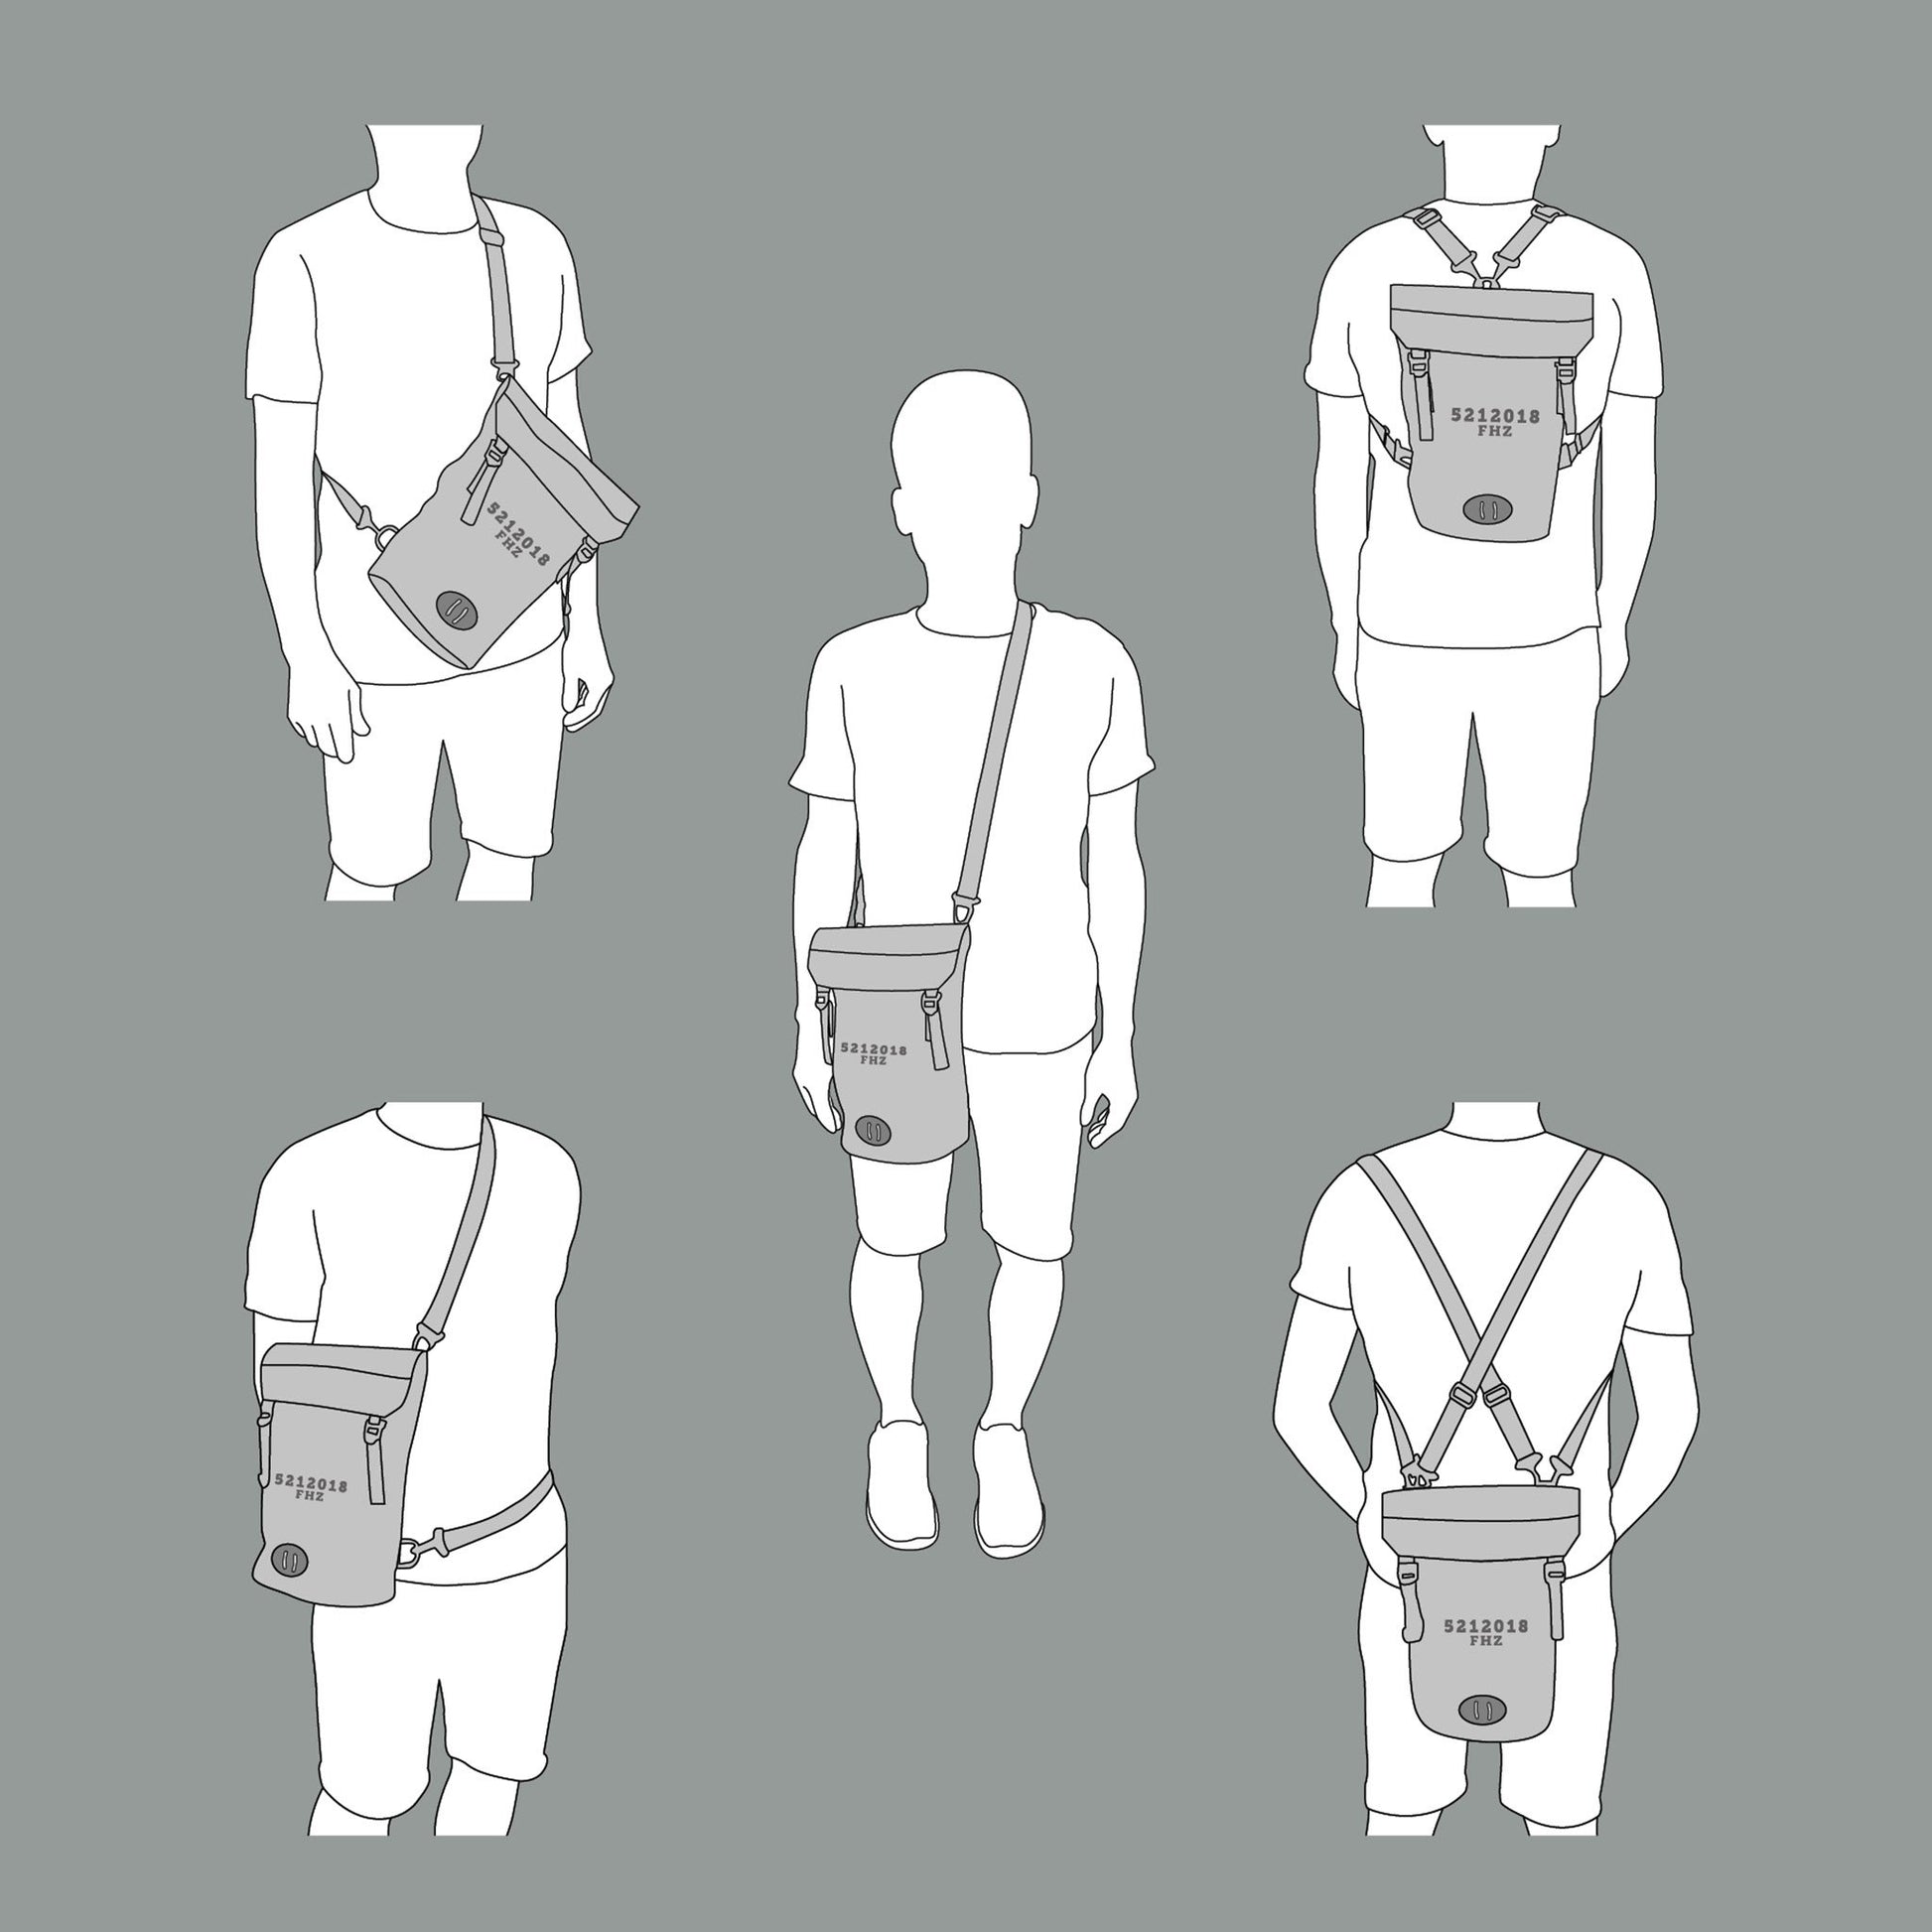 Illustration showing 5 different ways to wear the Fierce Hazel Evolution Convertible backpack